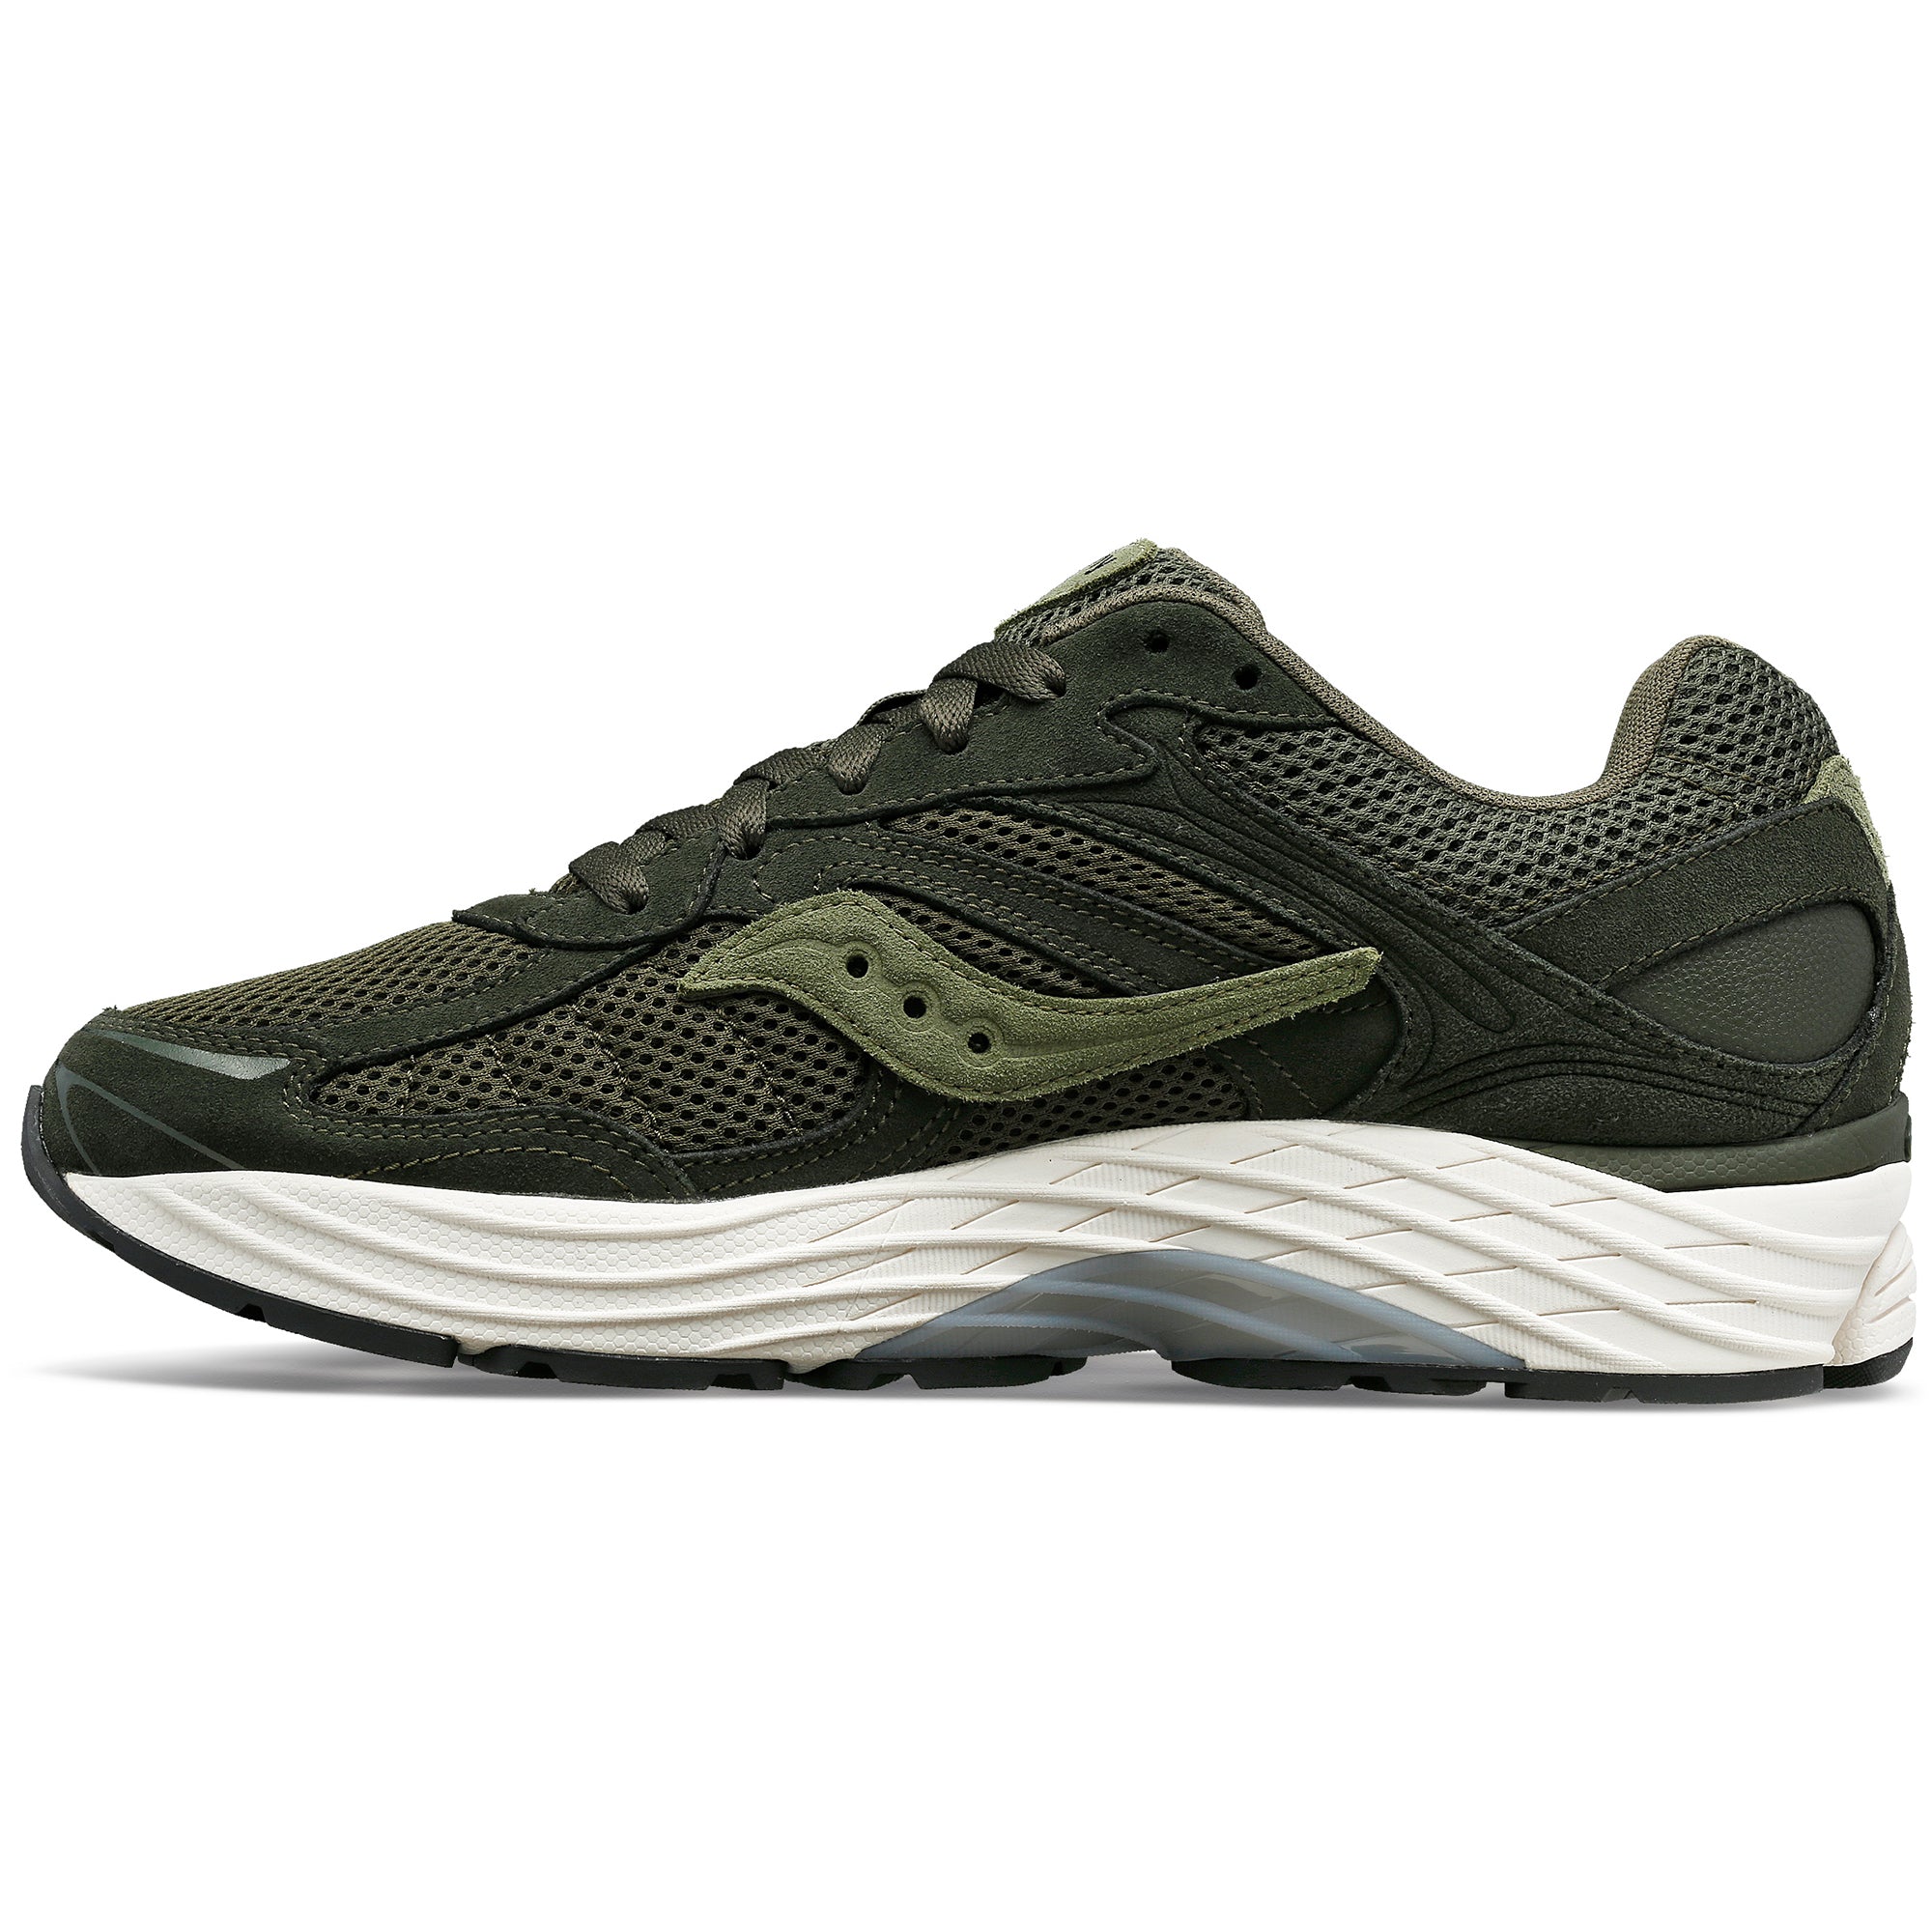 Saucony Pro Grid Omni 9 Trainers - Green